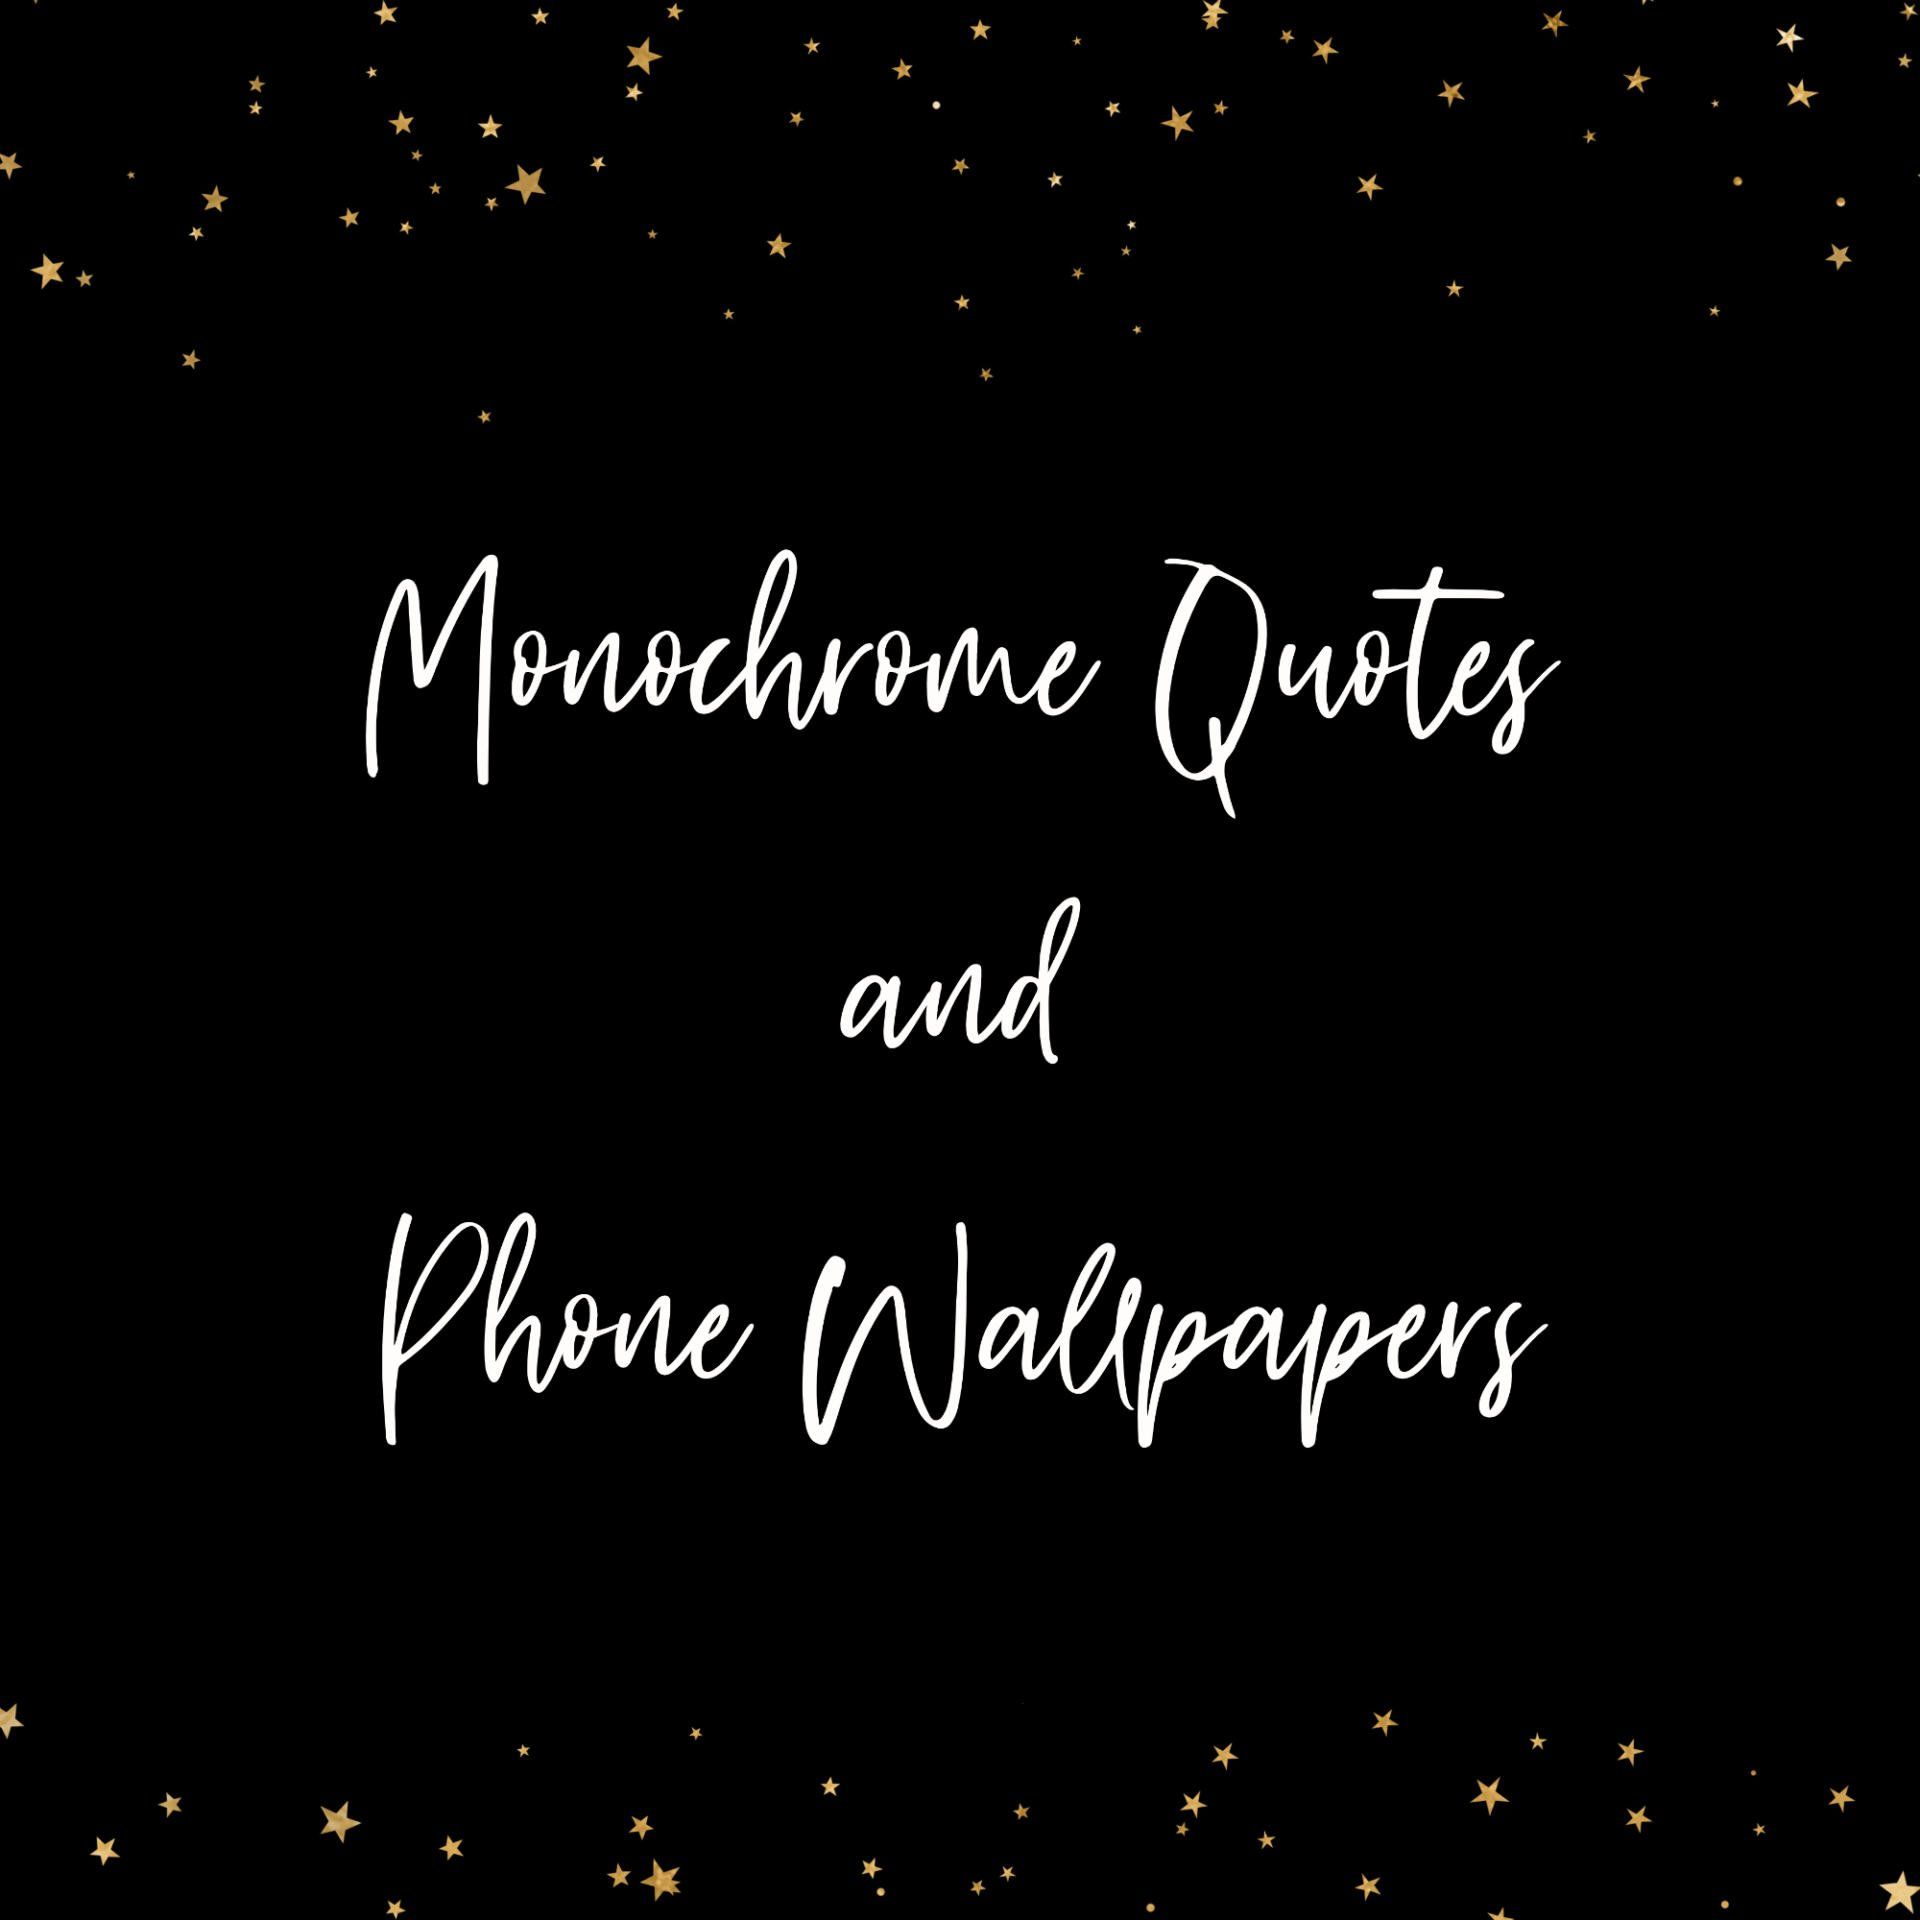 Free Monochrome Quotes, Phone Wallpaper and Background